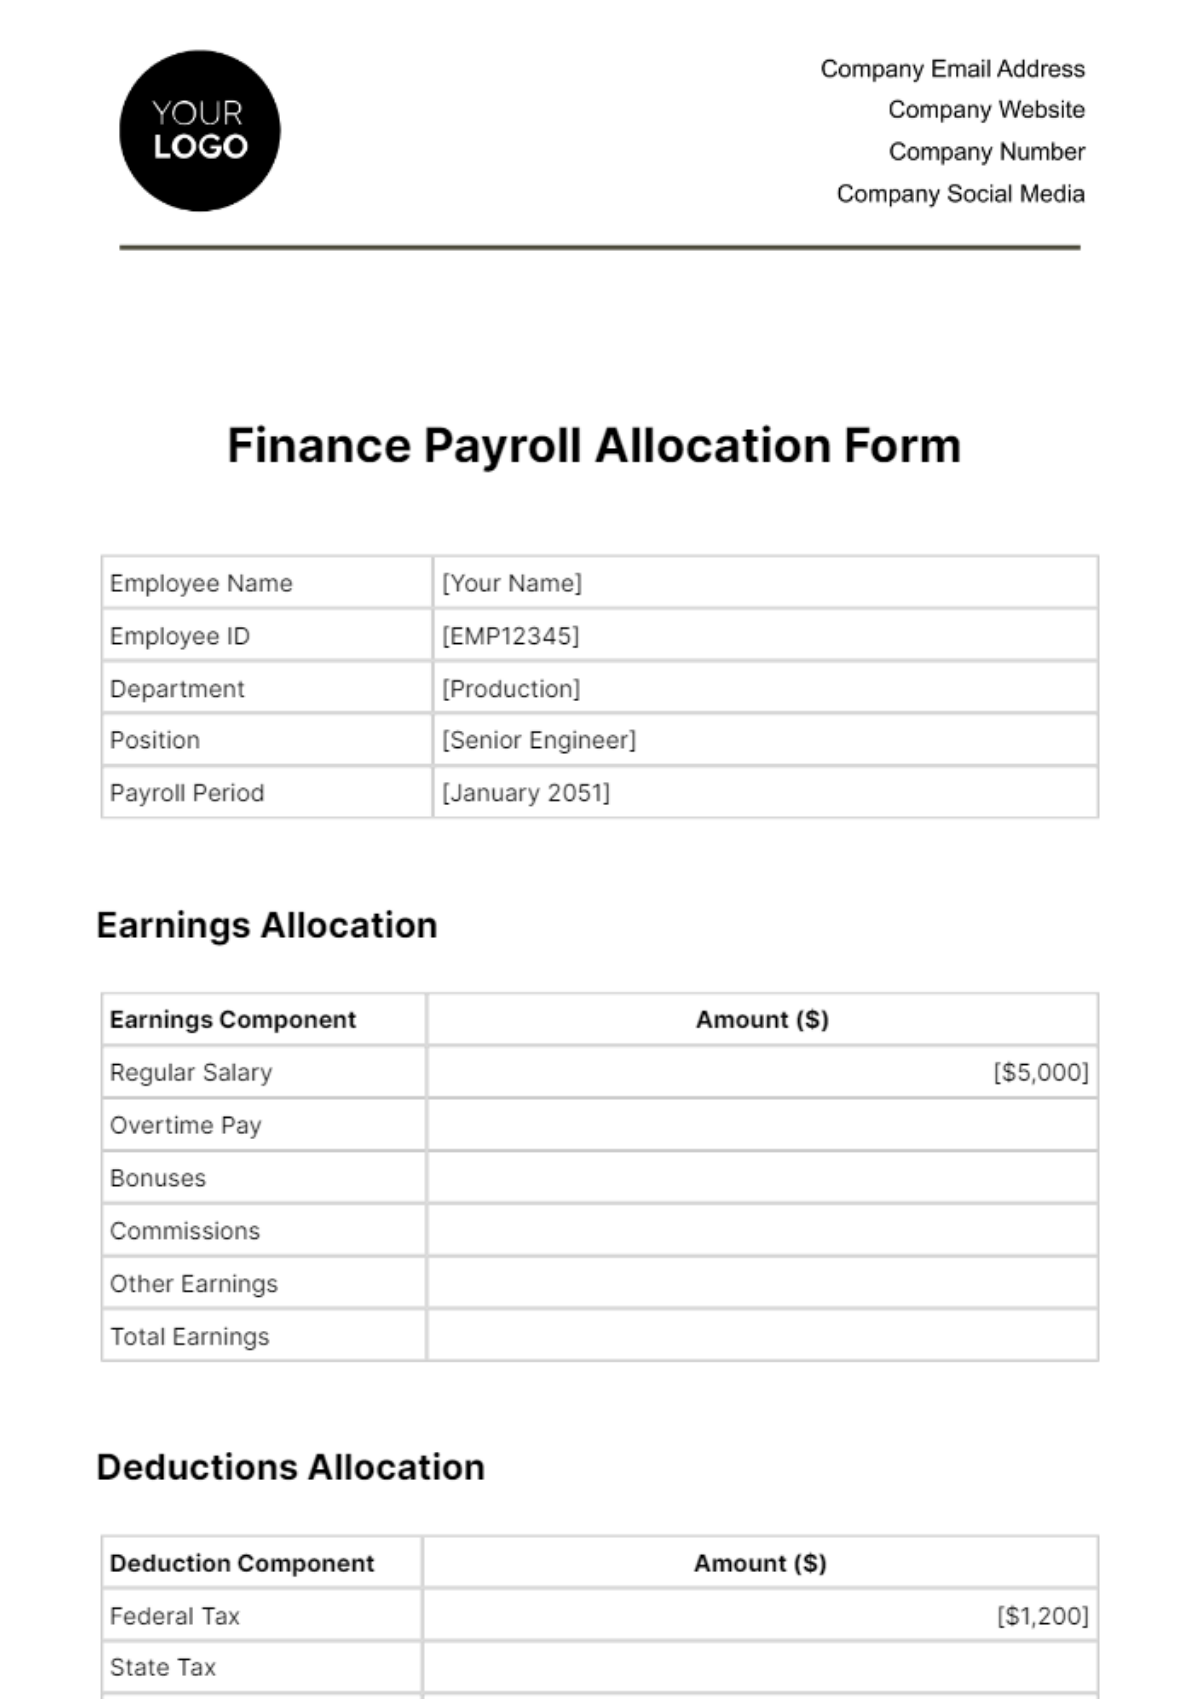 Finance Payroll Allocation Form Template